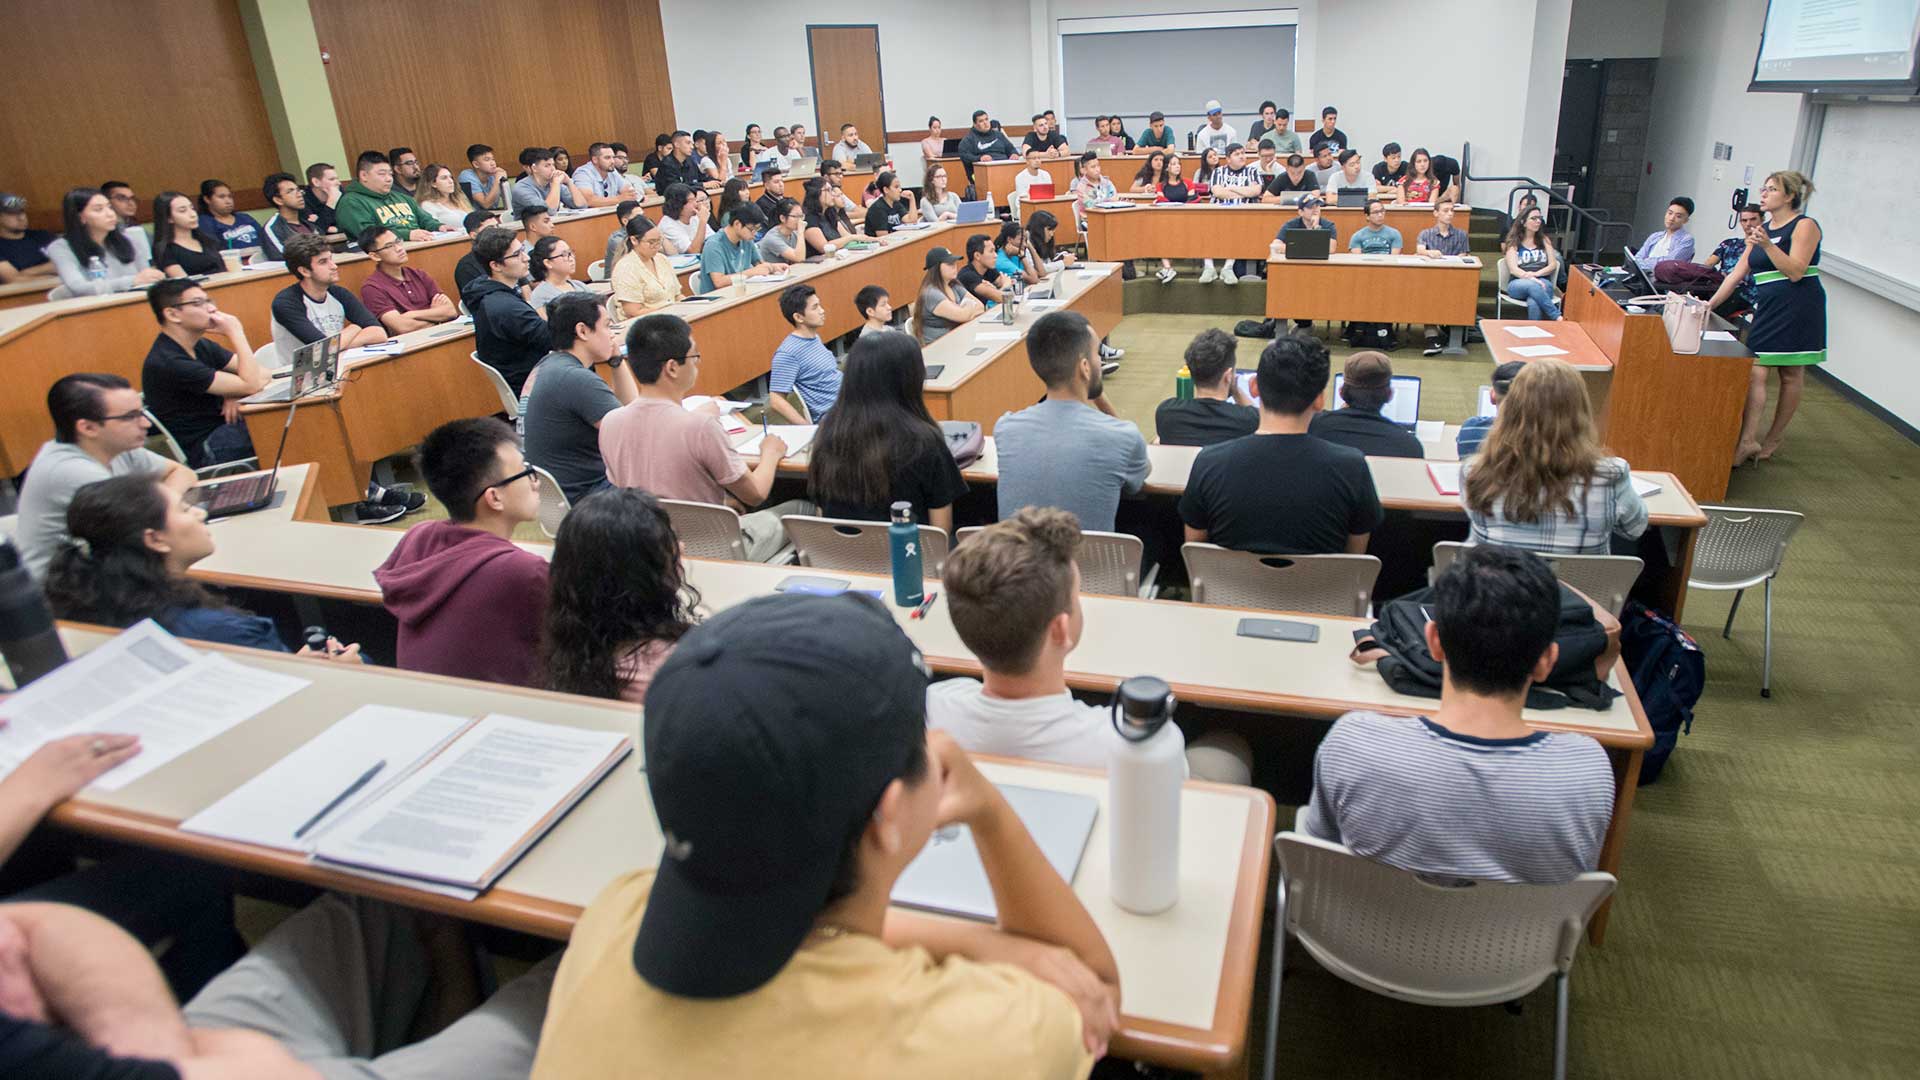 Female MHR professor teaching packed class on first day of class